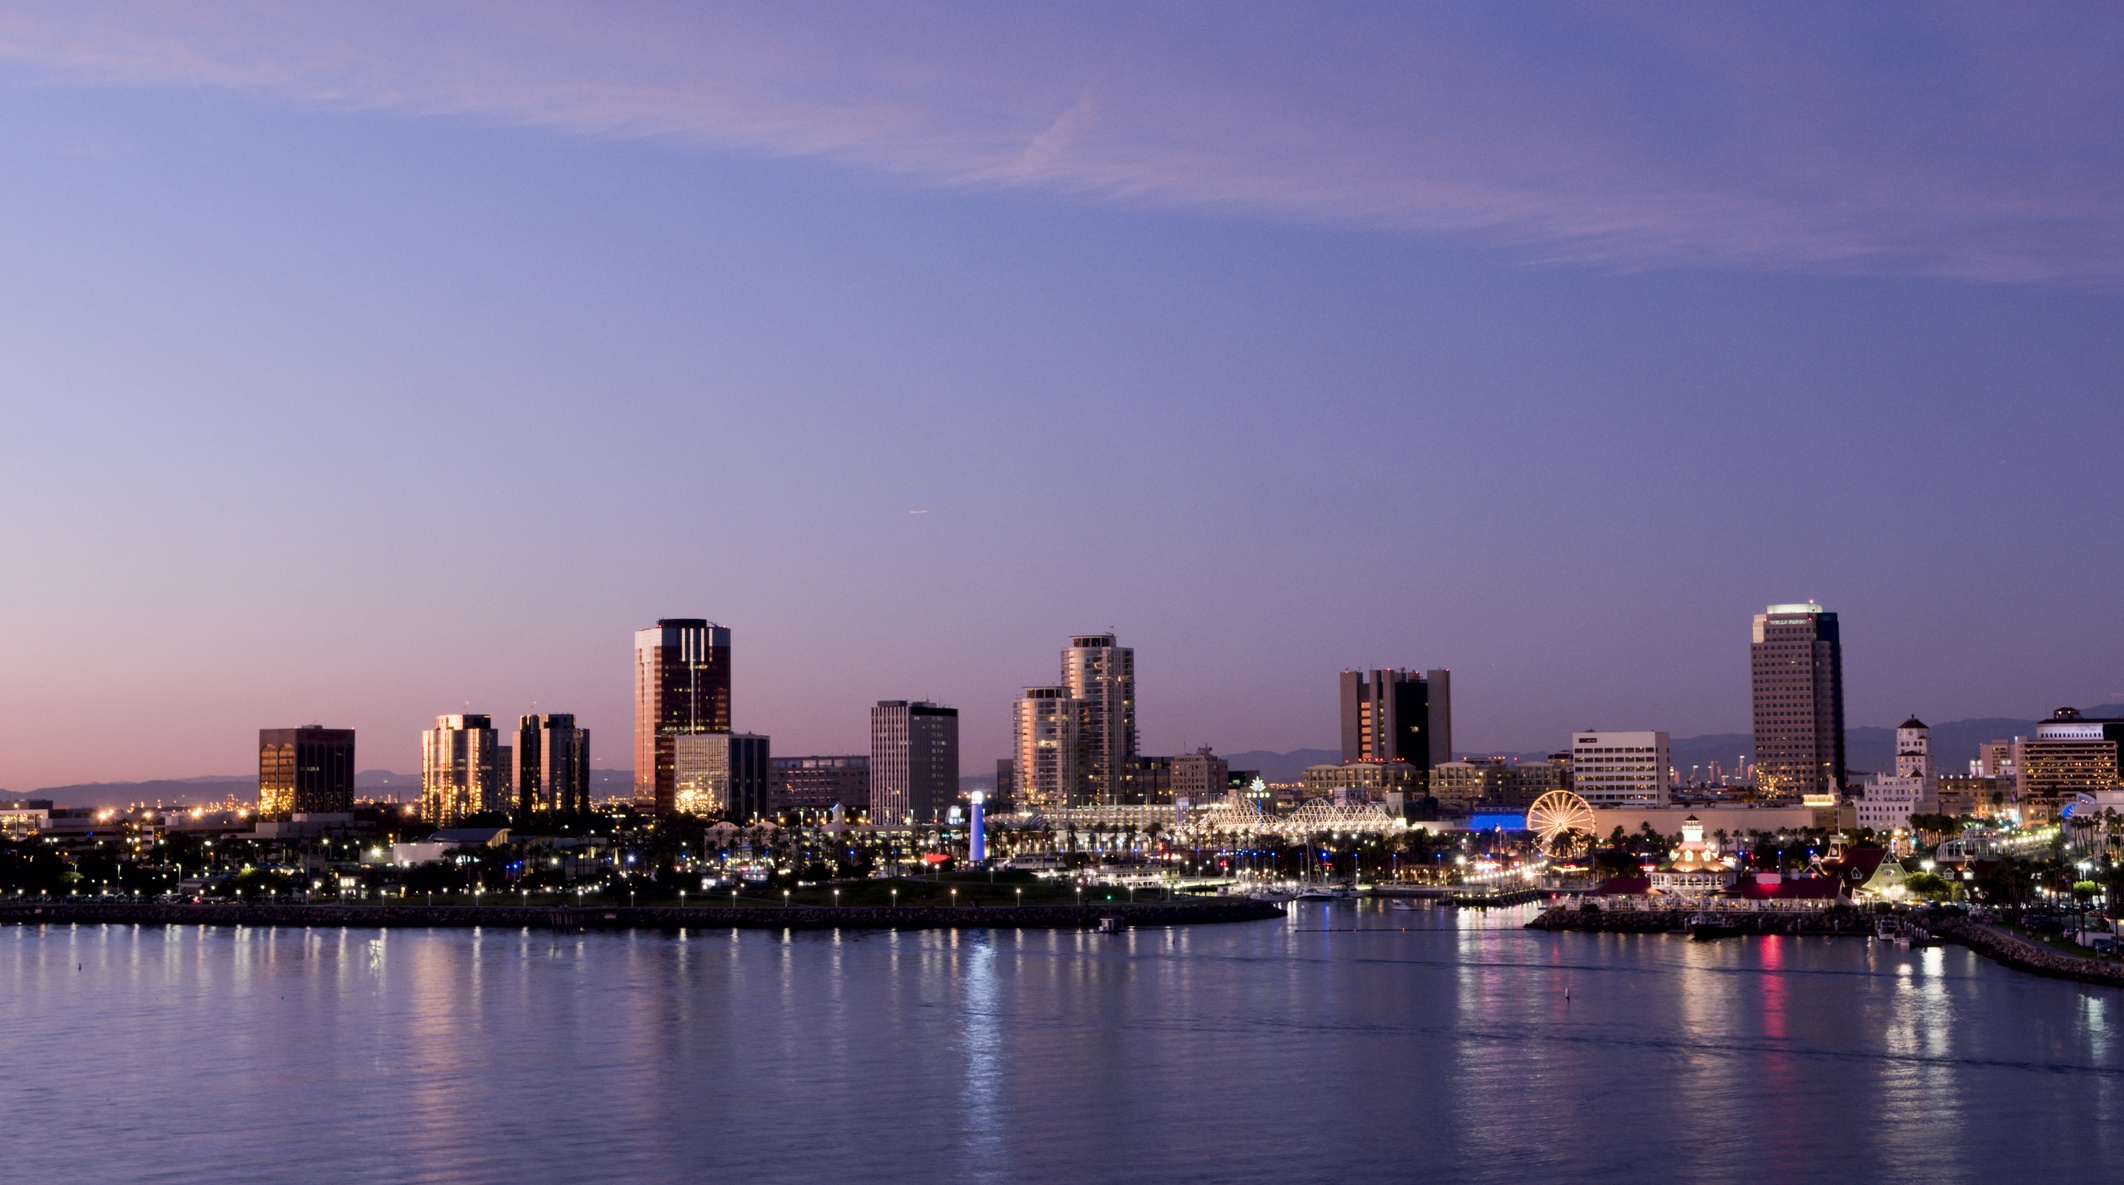 Download this Long Beach Skyline picture